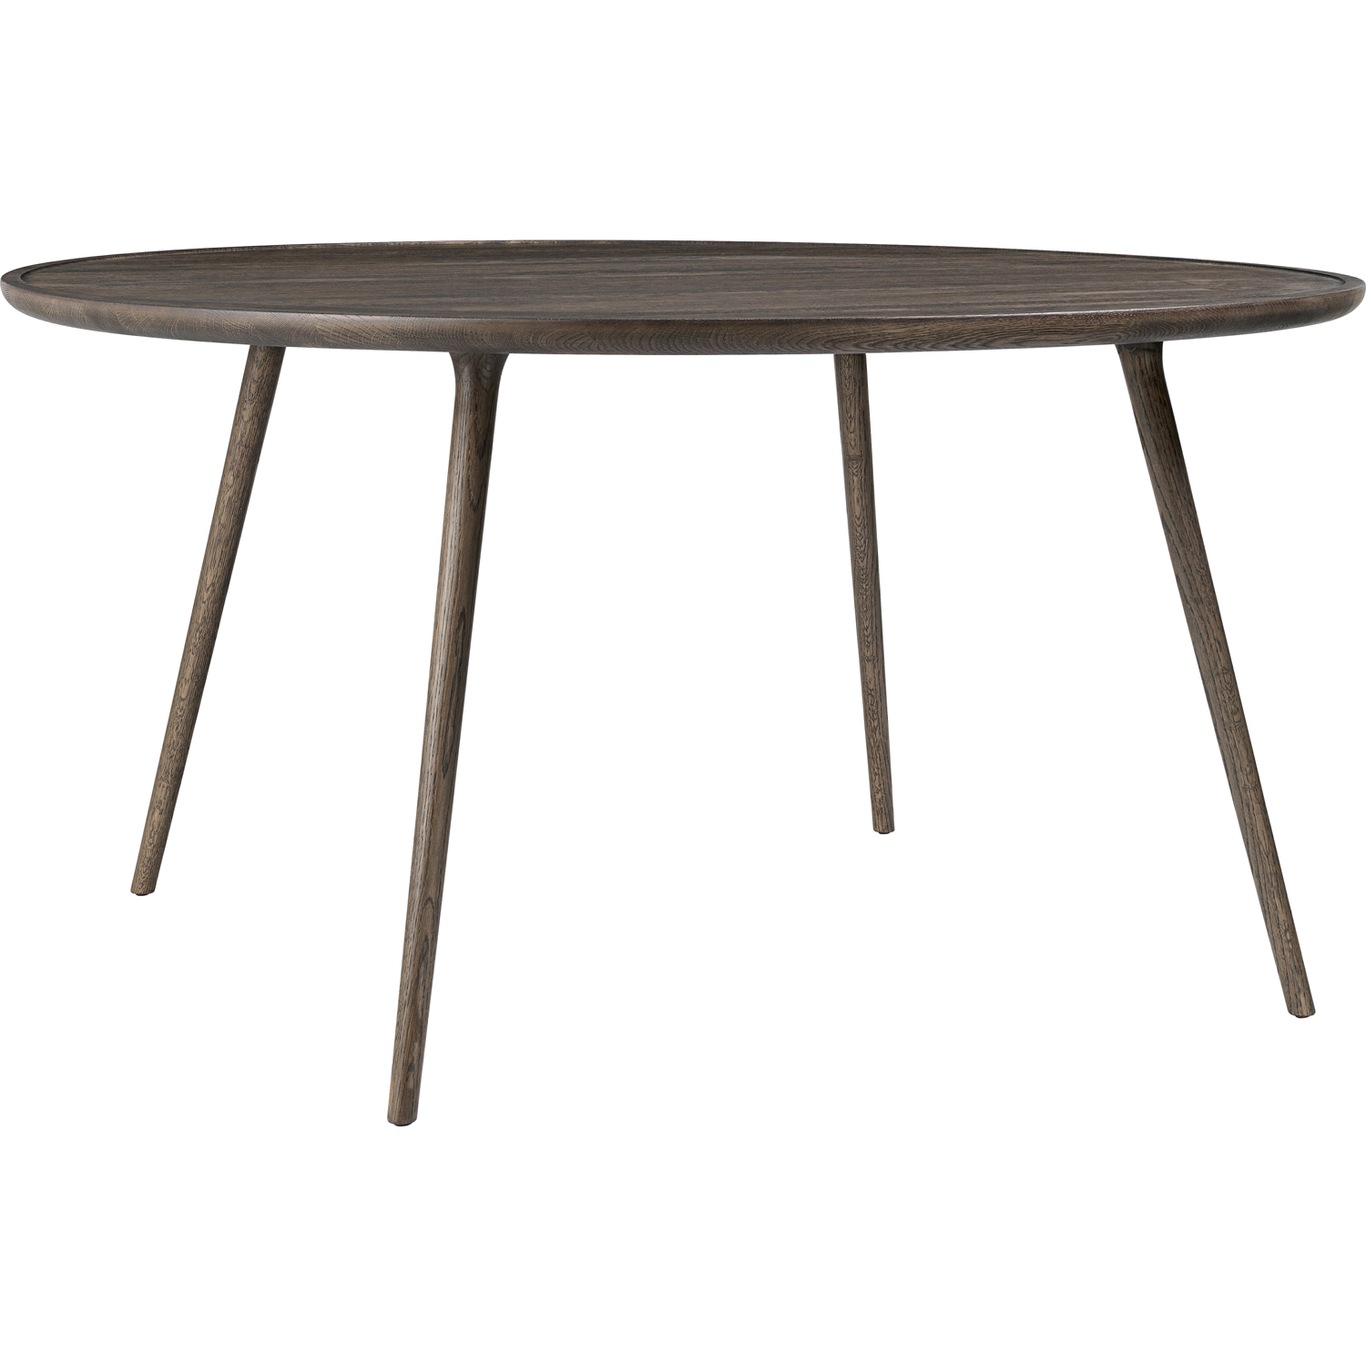 Accent Dining Table Sirka Grey Stained Oak, 140 cm